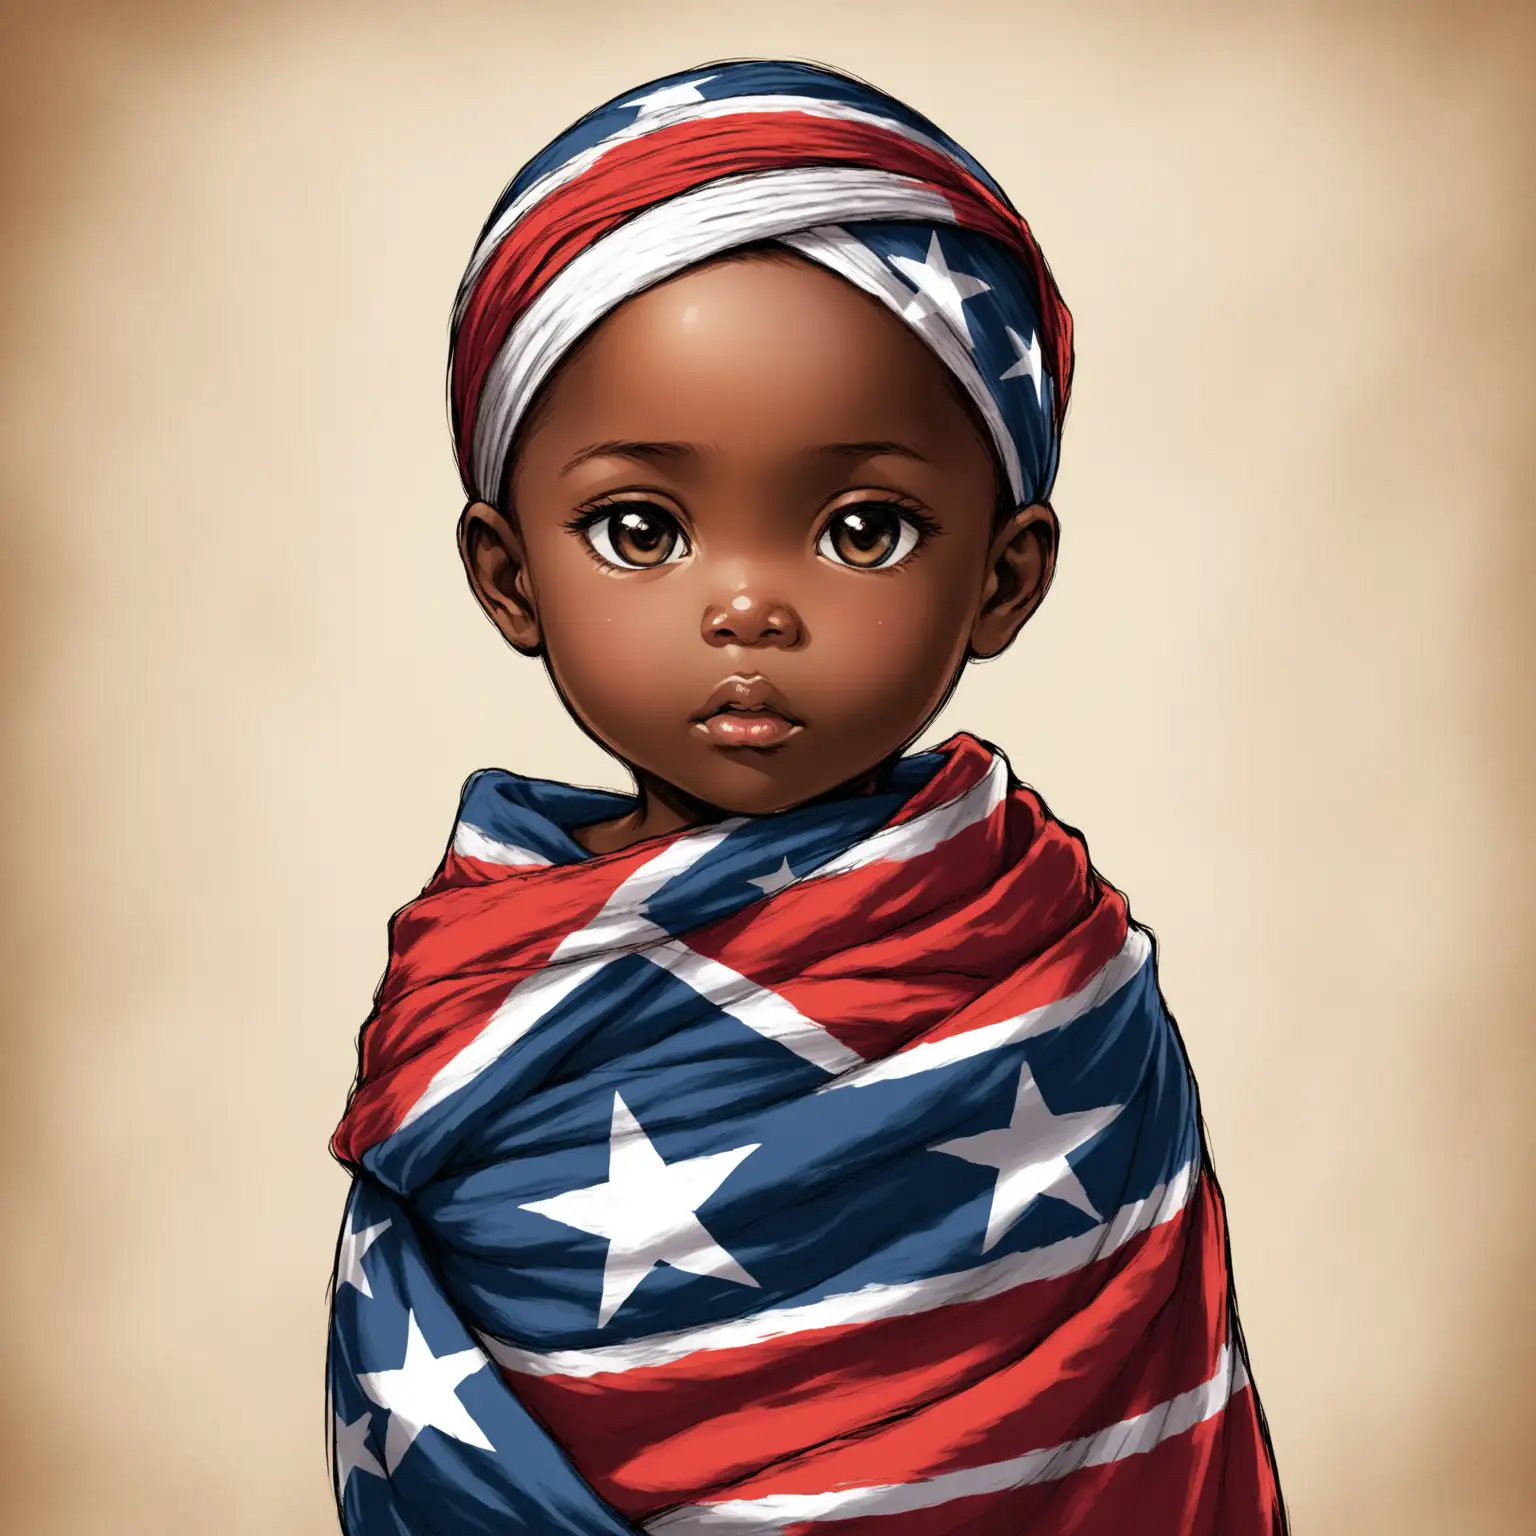 Create a image of a black child about the five wrapped up  in an confederate flag, with image of the state of Texas in back ground